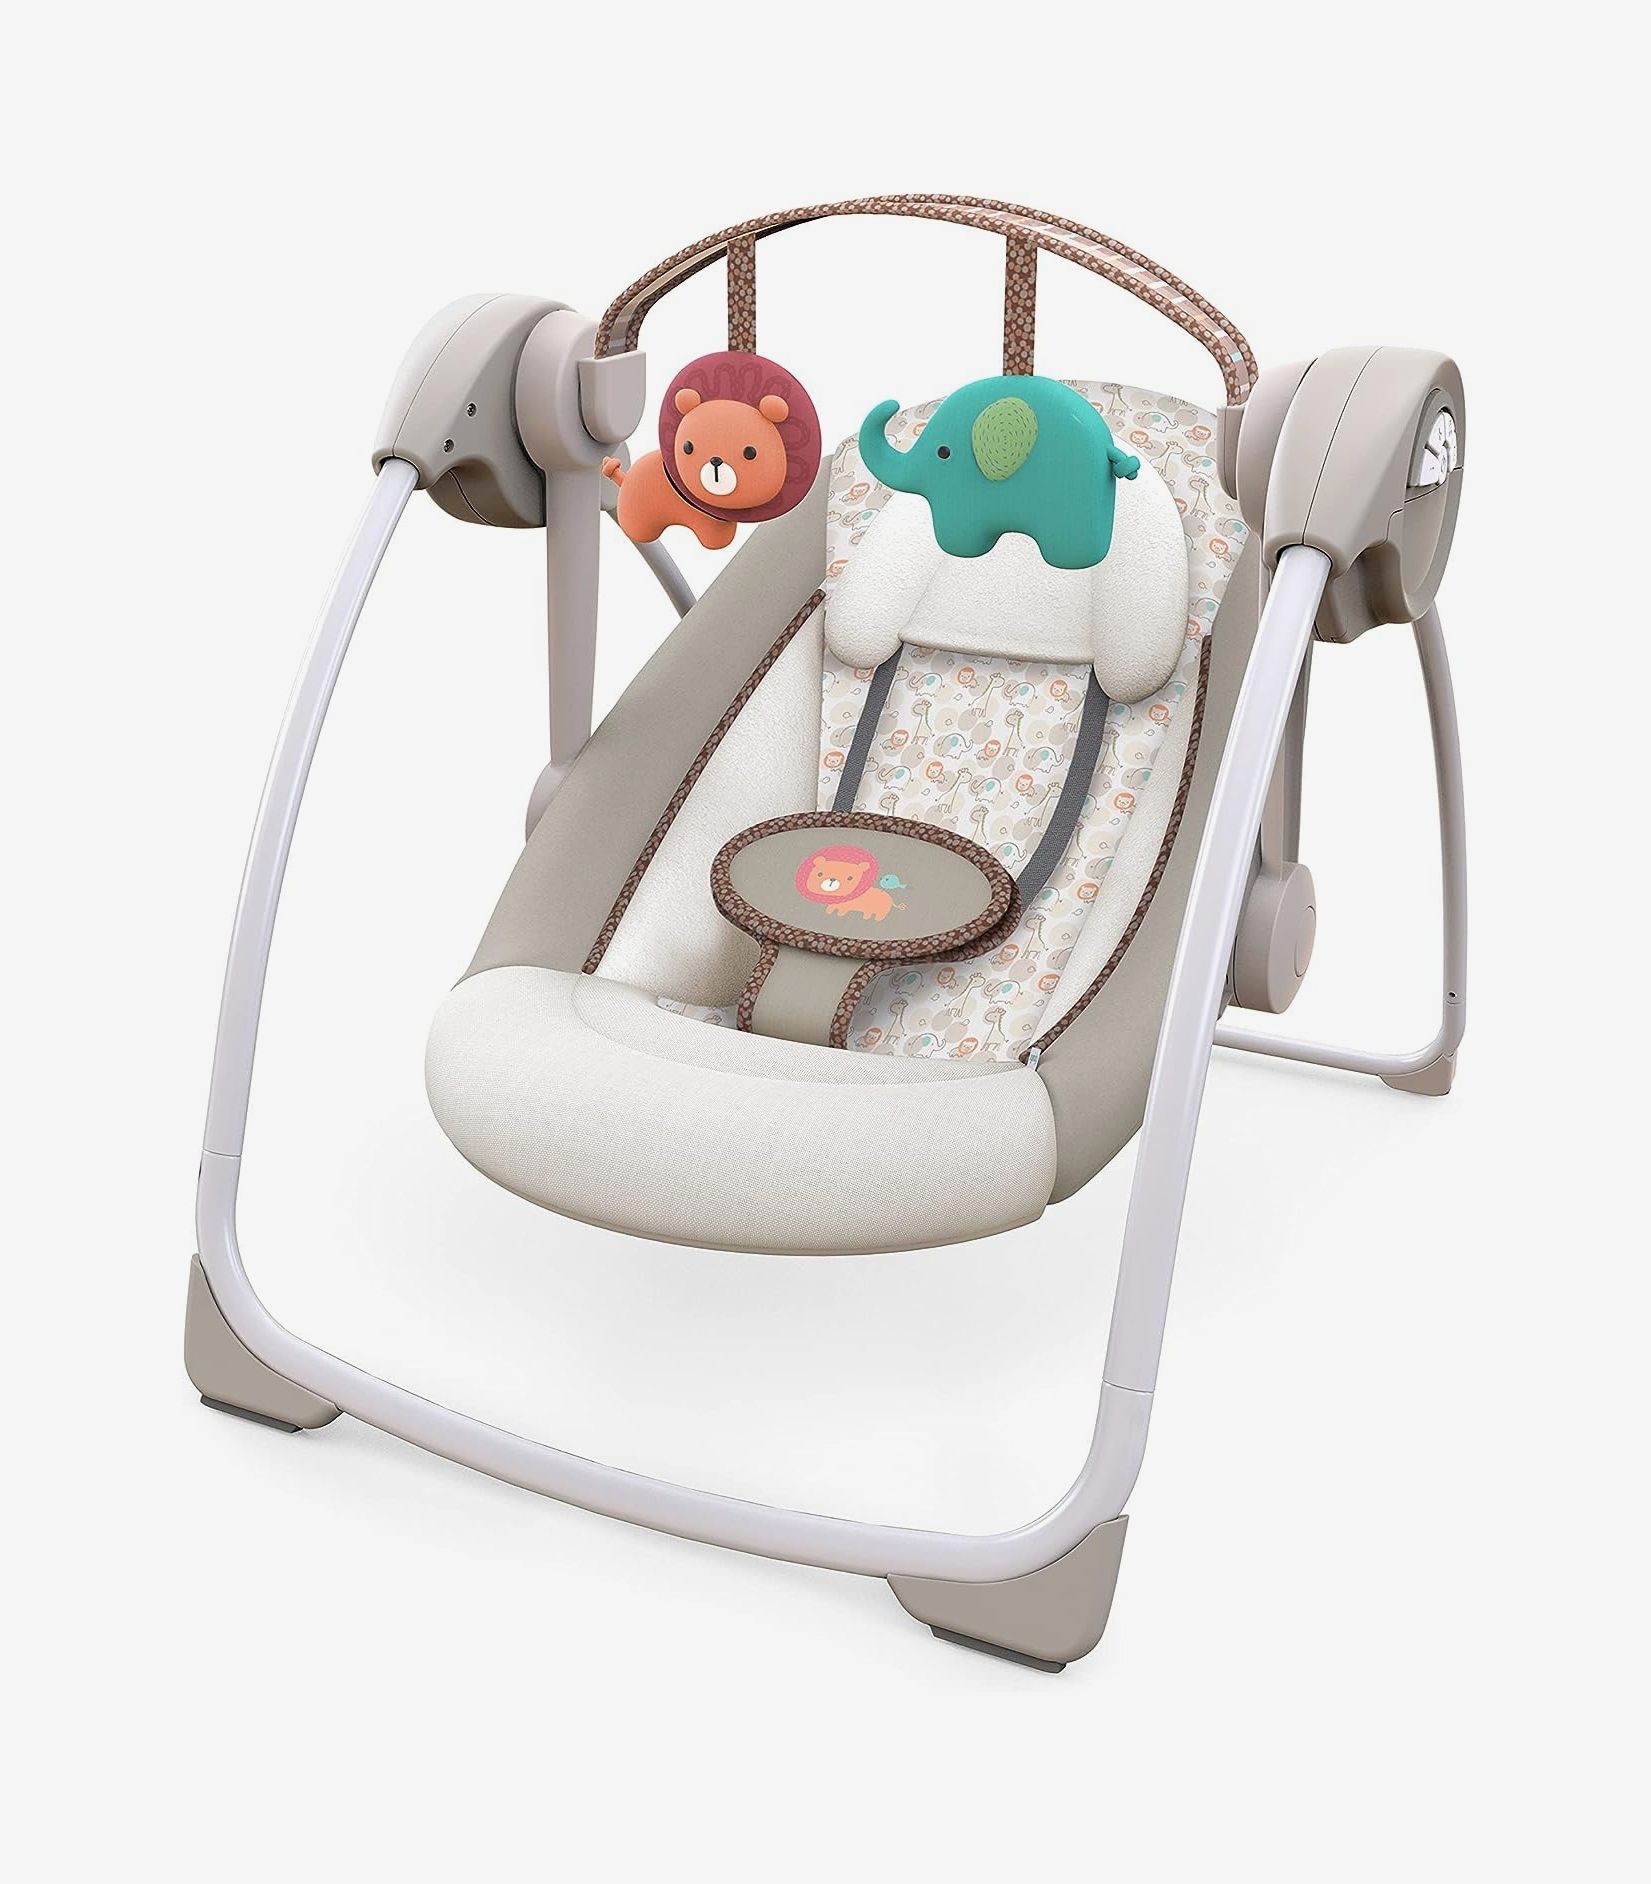 INFANS 2 in 1 Baby Swing and Bouncer, Portable Newborn Rocker with 5 Speed  Sway, Compact Electric Baby Swing